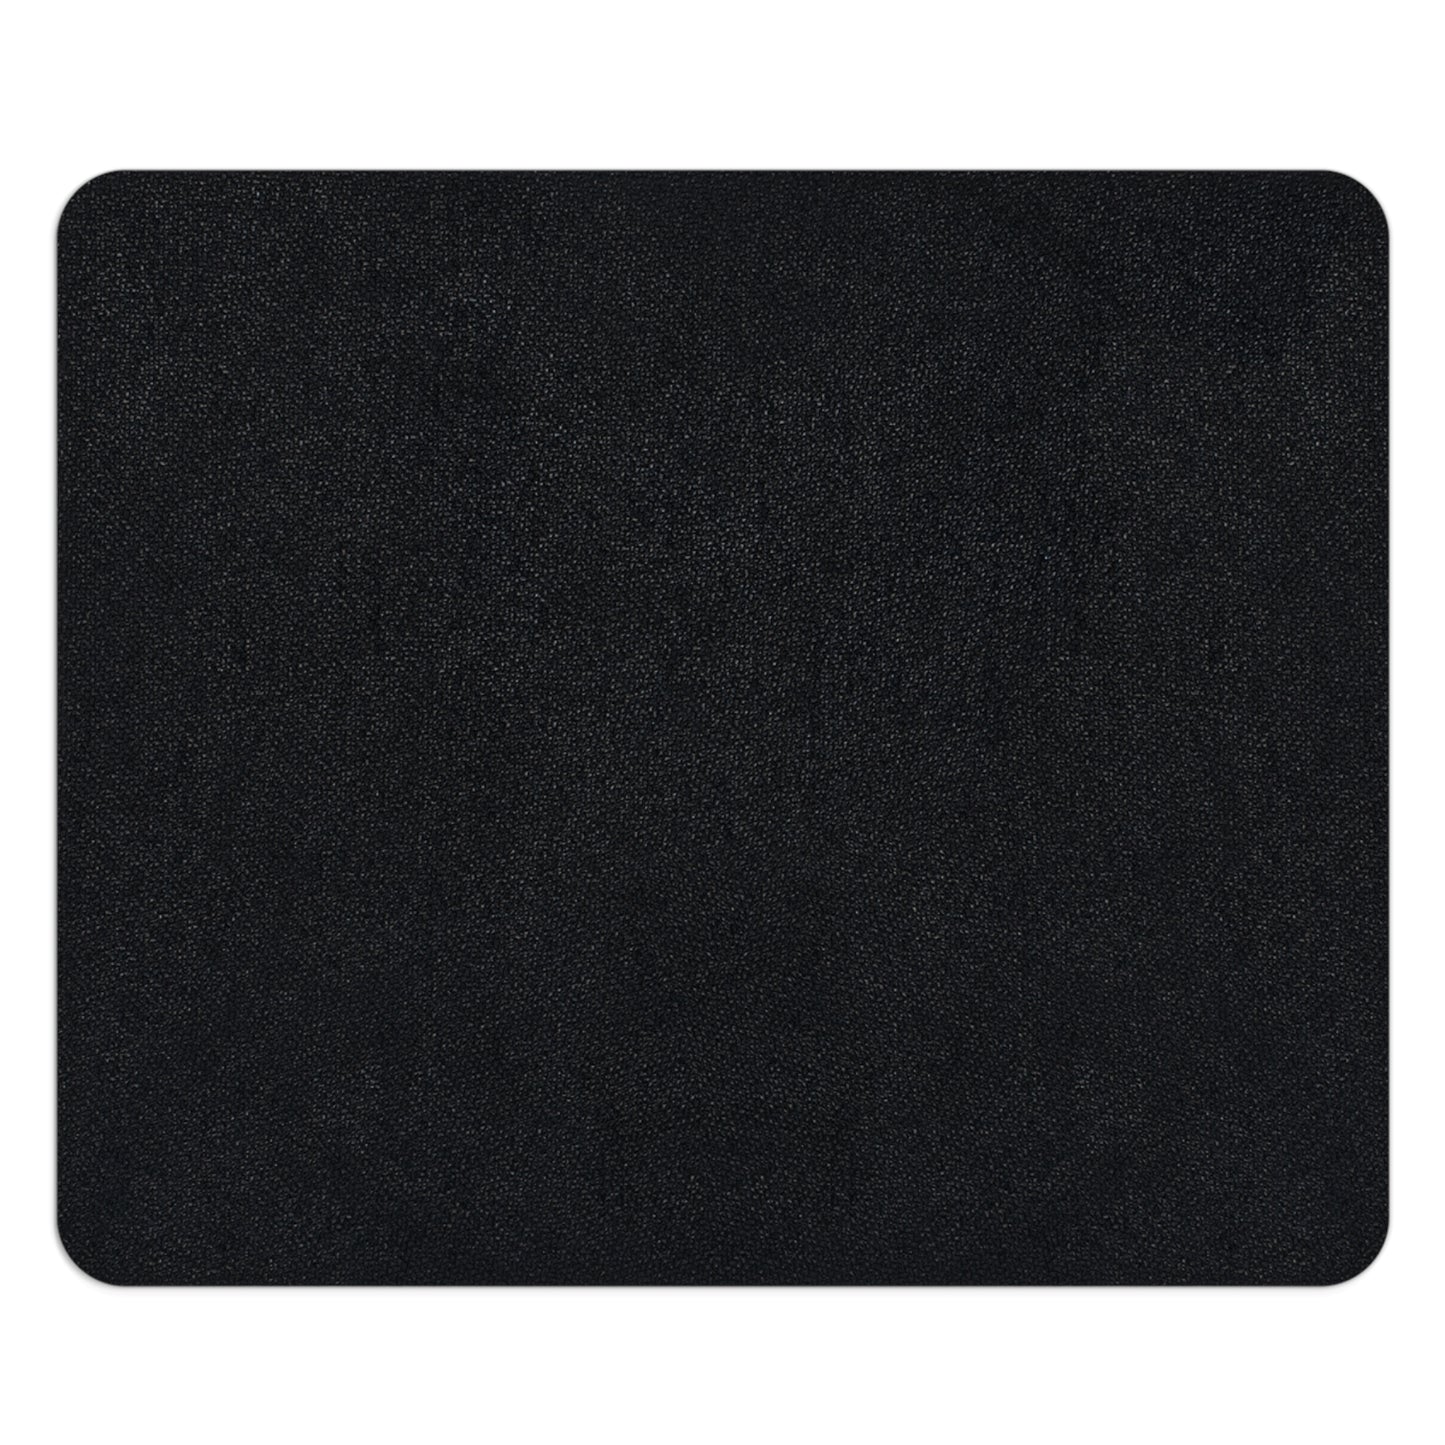 Elegant Floral Sun Mouse Pad (Round or Rectangle) Witchy Cottagecore Office Accessories